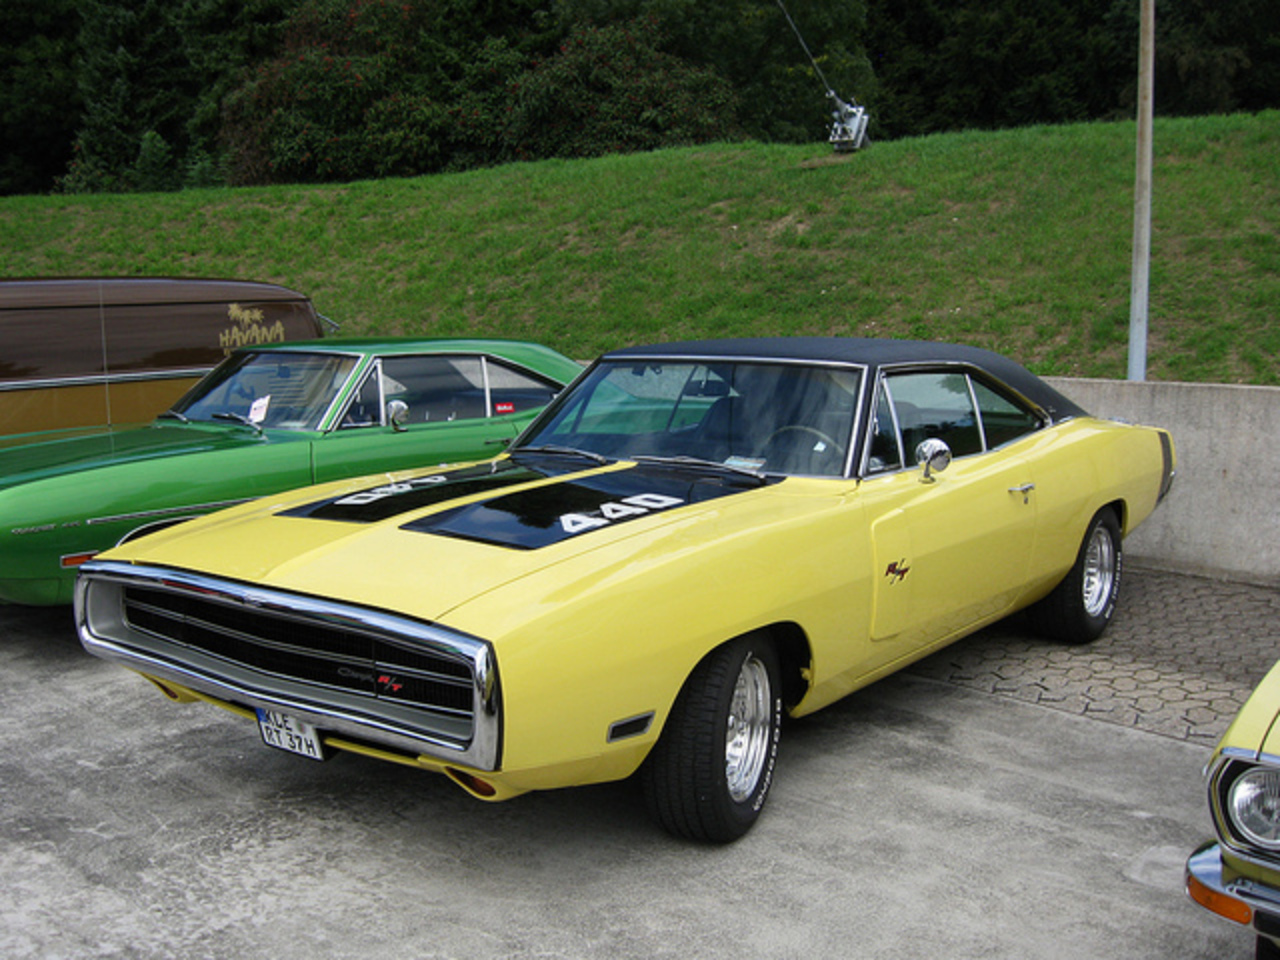 Dodge Charger RT 440 1970 | Flickr - Photo Sharing!